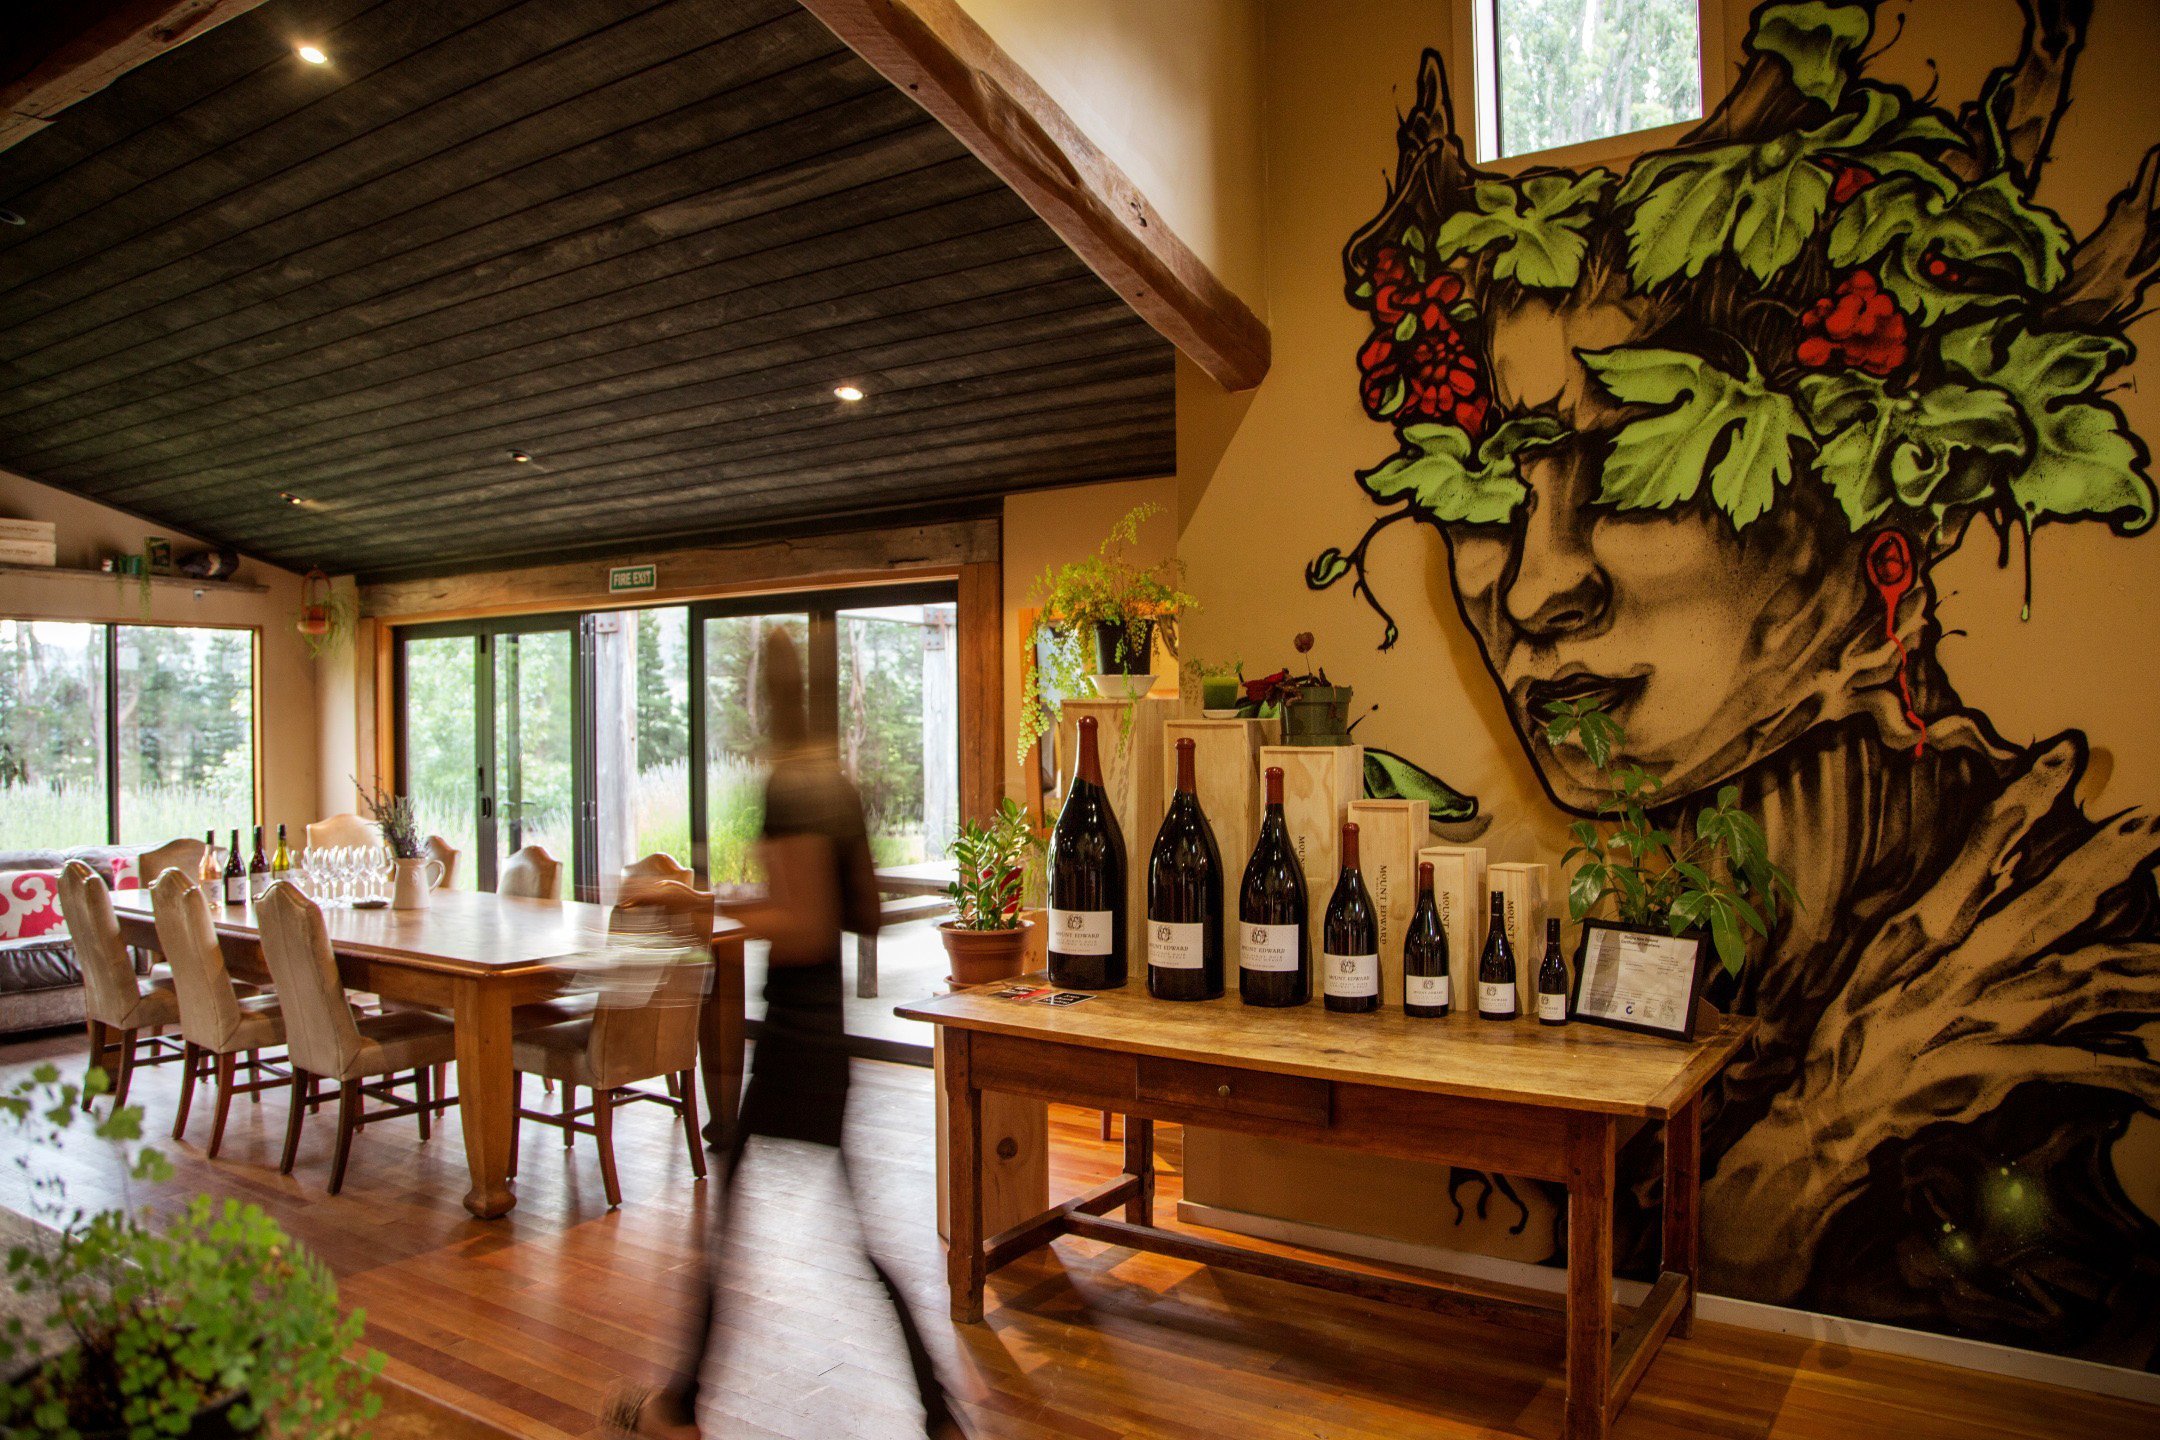 As well as offering an excellent range of wines, Mount Edward’s Gibbston winery also showcases...